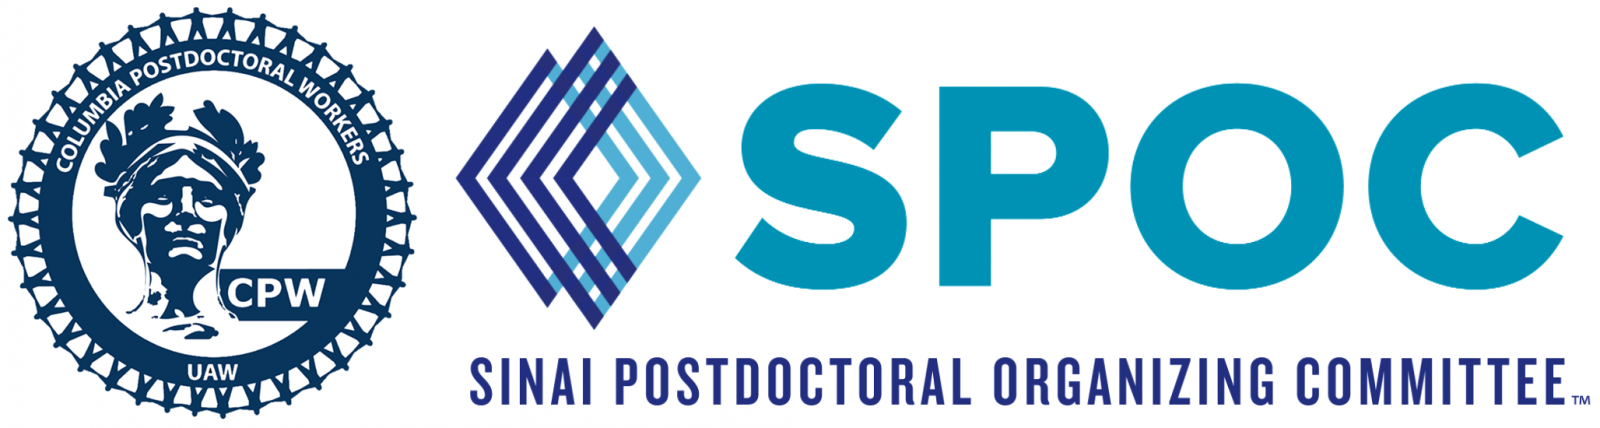 Columbia Postdoctoral Workers and Sinai Postdoctoral Organizing Committee